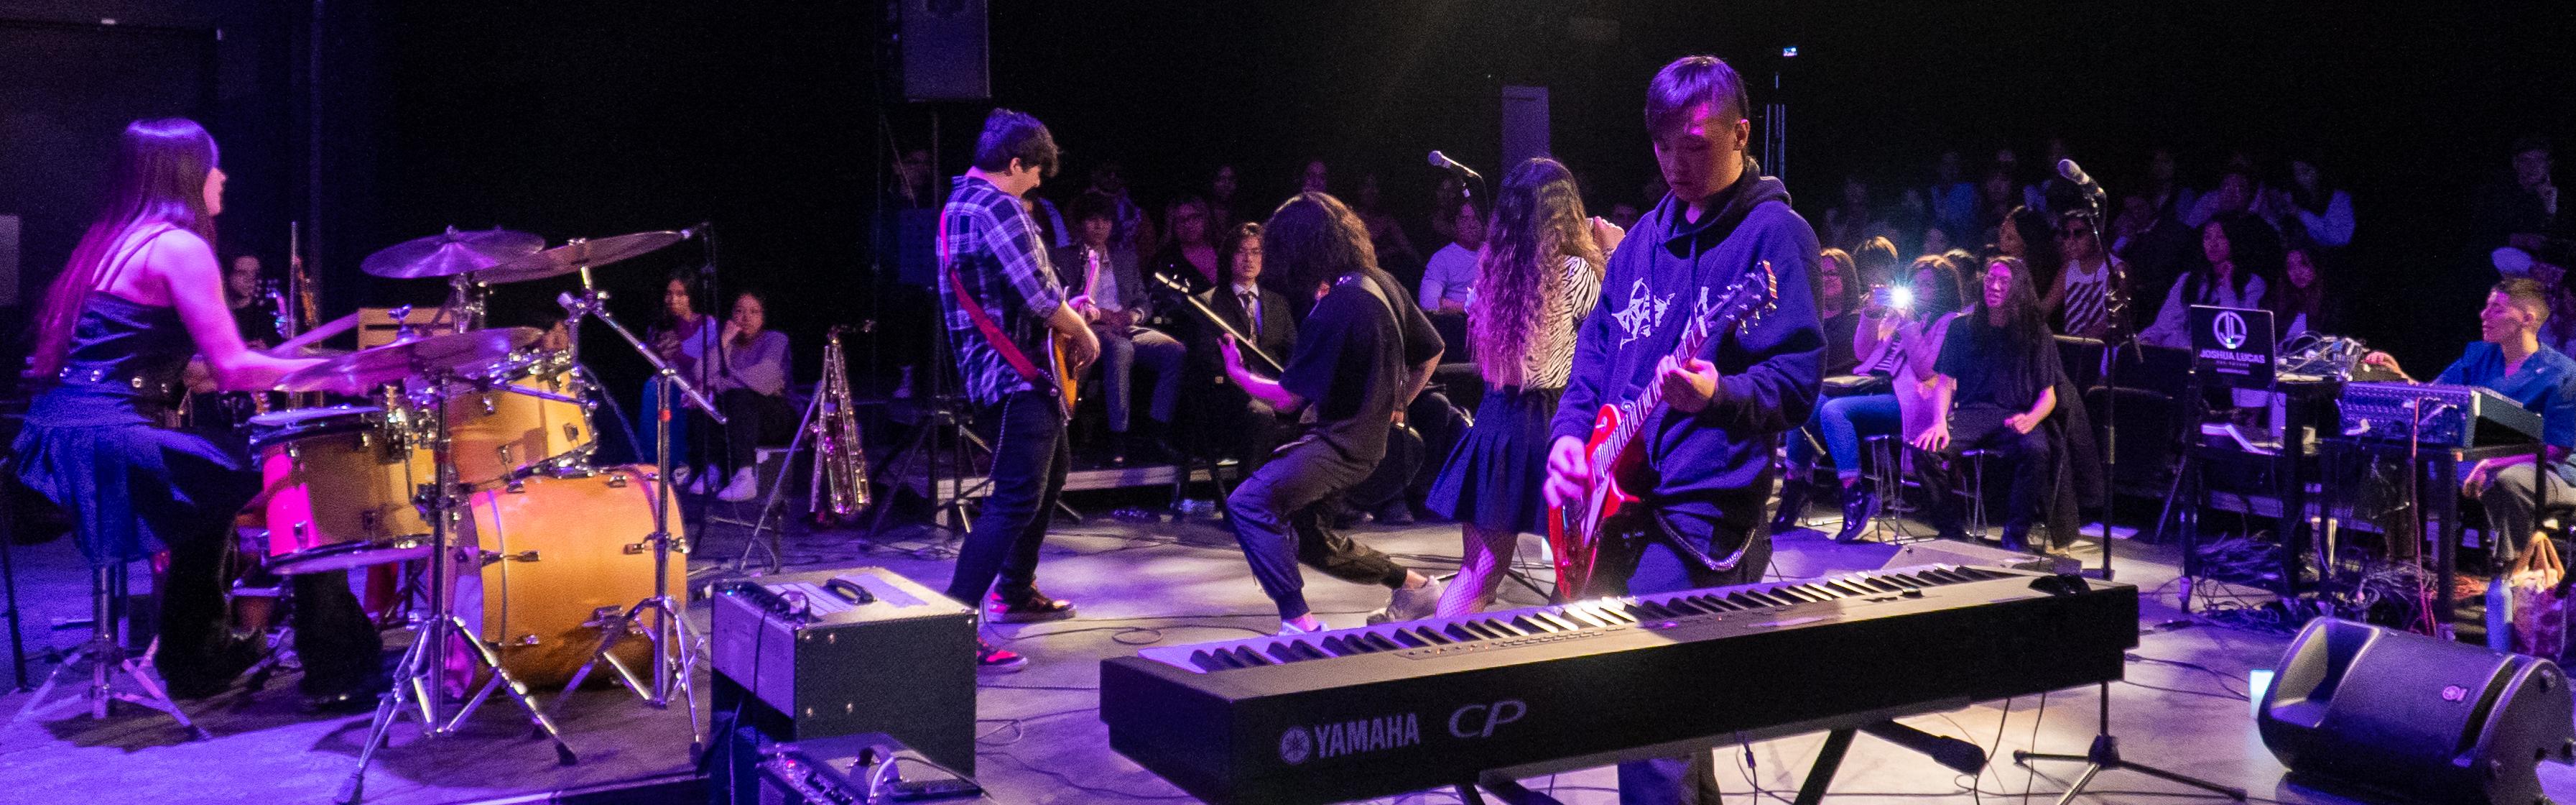 Students onstage at a concert, keyboard in the foreground